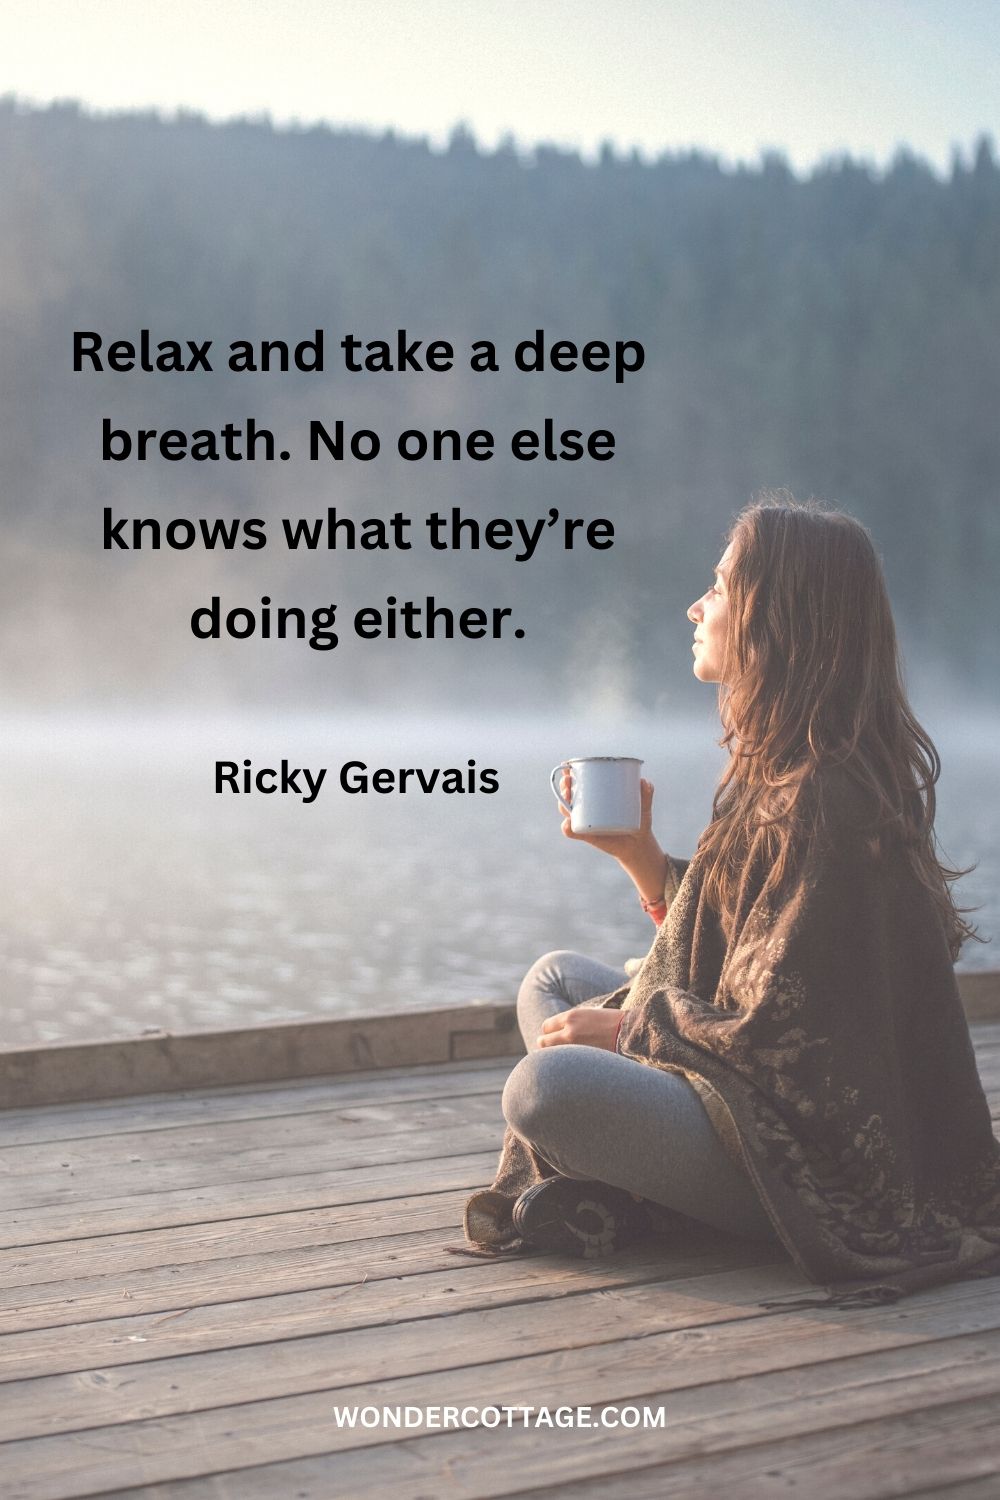 Relax and take a deep breath. No one else knows what they’re doing either. Ricky Gervais